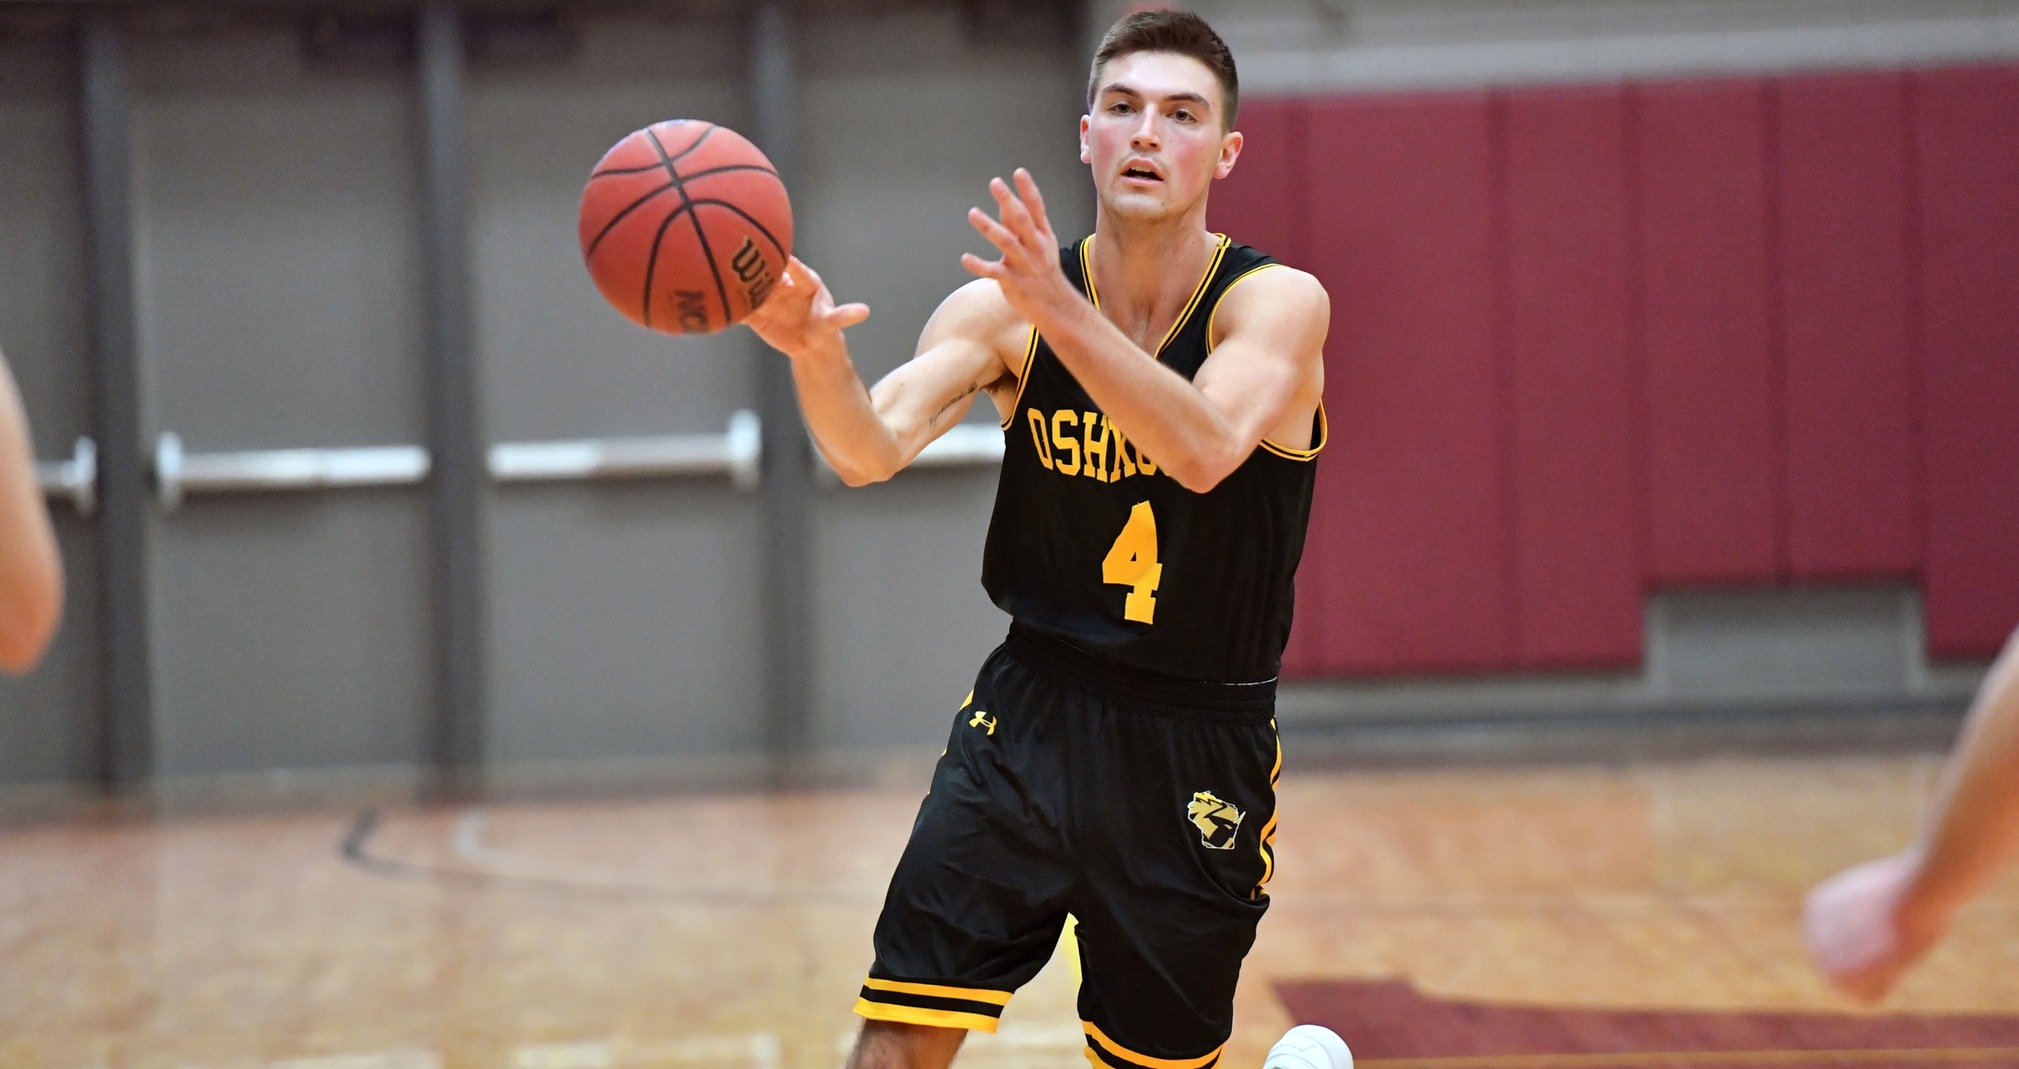 Brett Wittchow scored 15 points while totaling three rebounds and two assists against the Eagles.